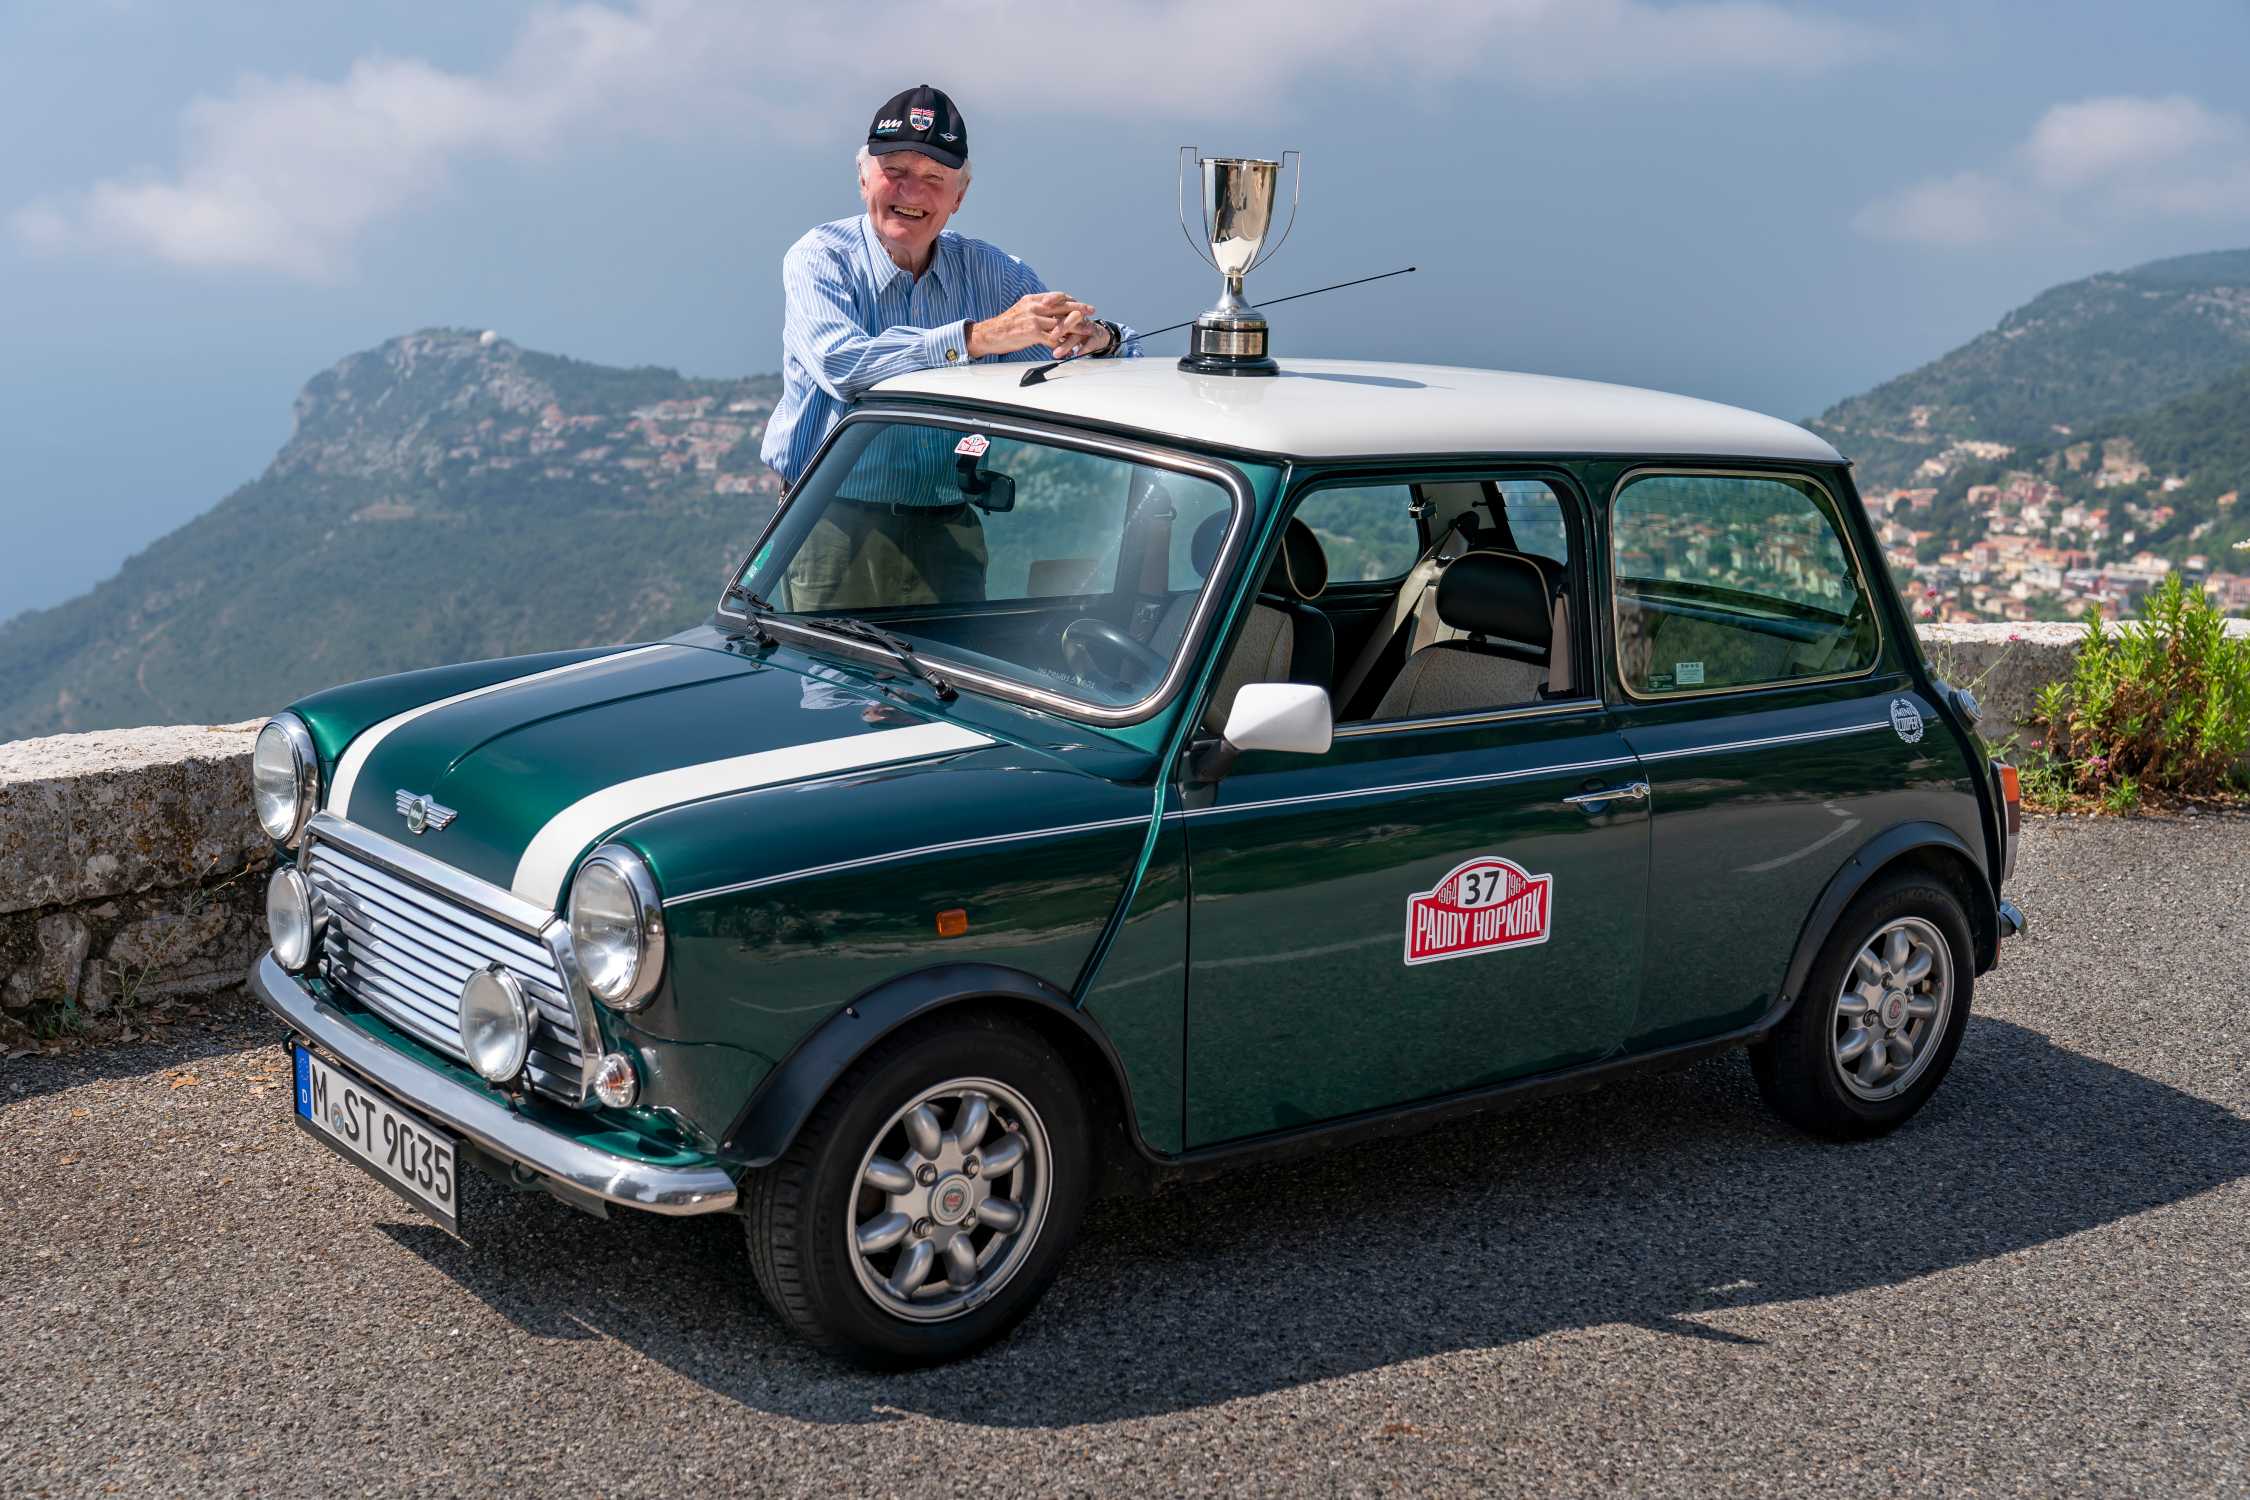 Paddy Hopkirk: Gentleman, legend in the classic Mini and fifth Beatle.